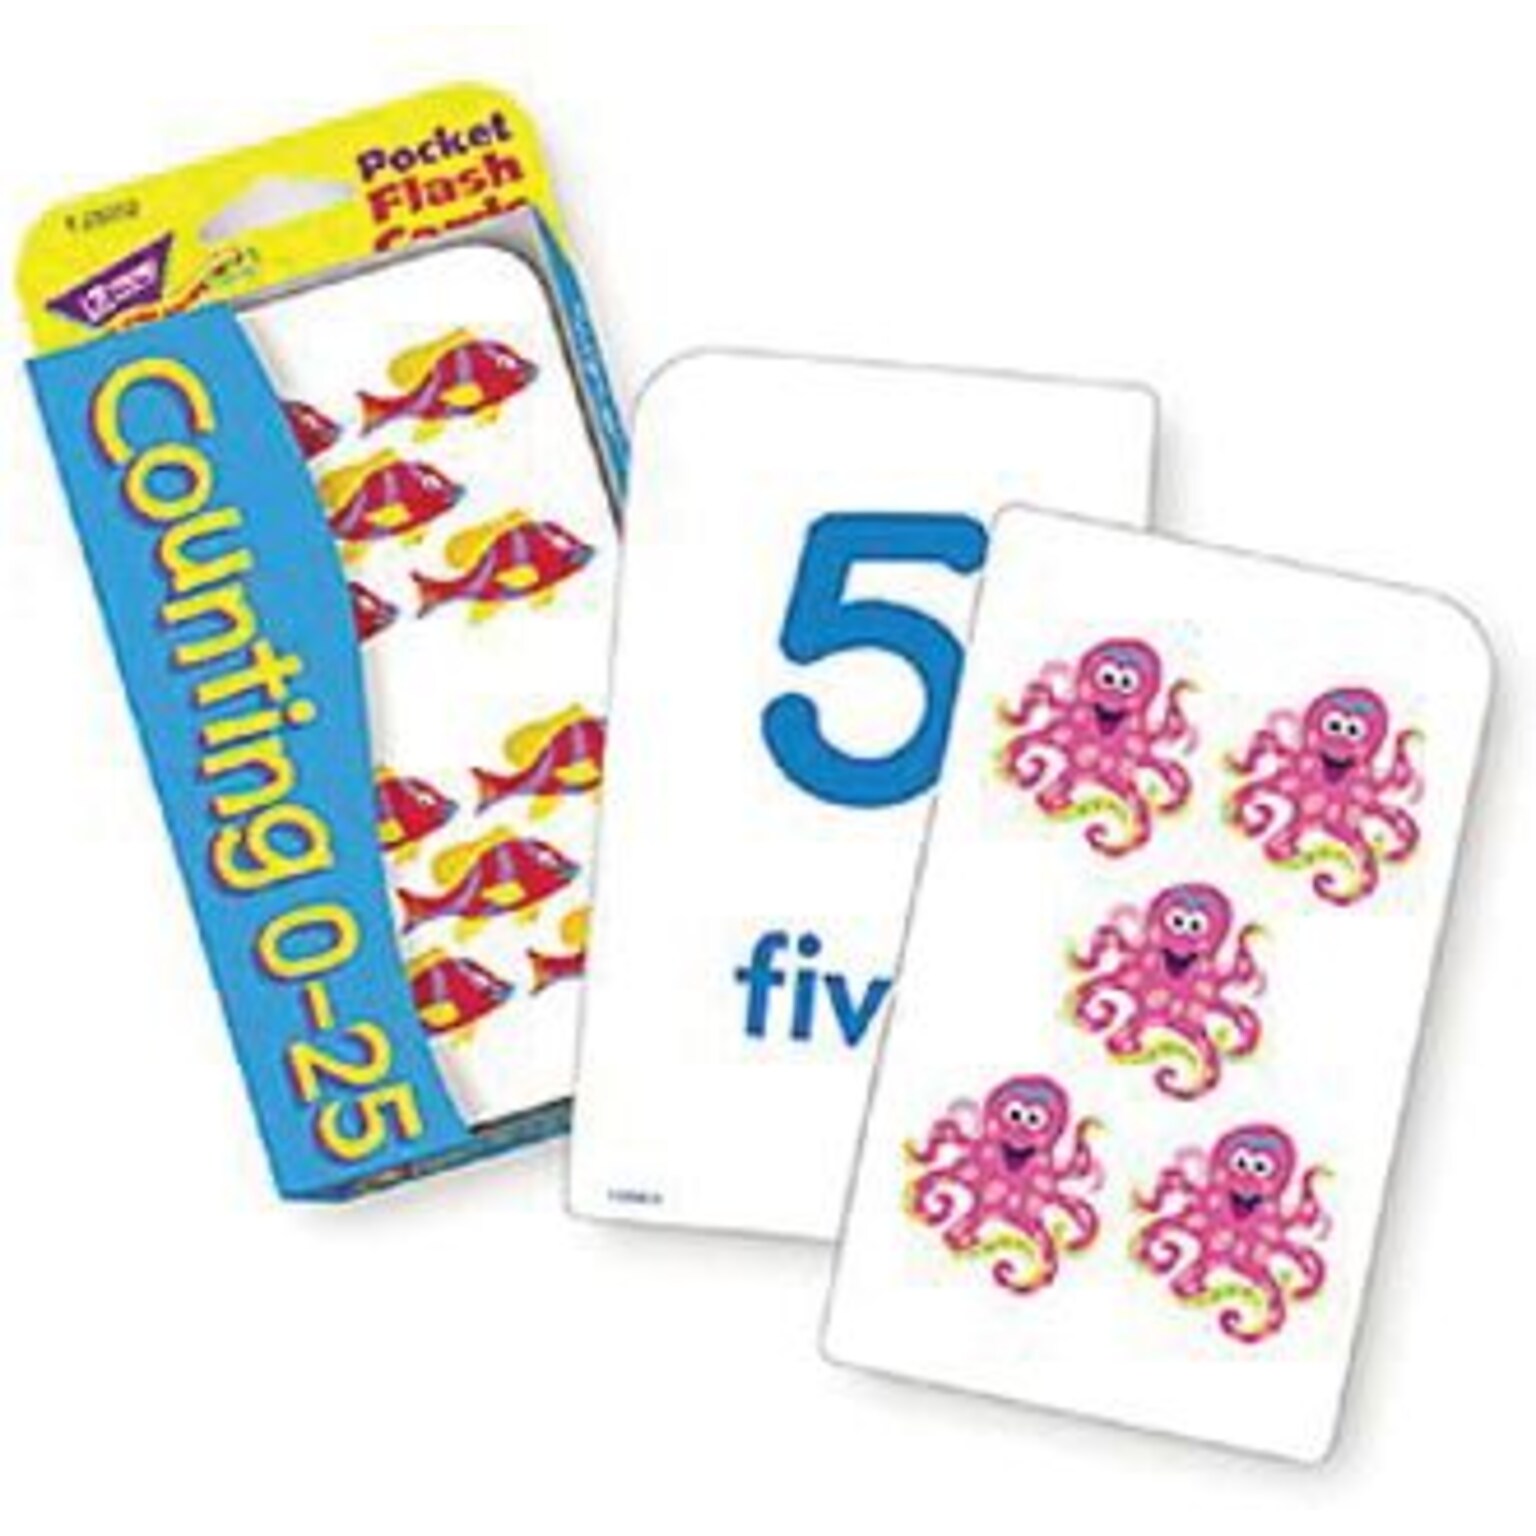 Counting 0-25 Pocket Flash Cards for Grades PreK-1, 56 Pack (T-23002)